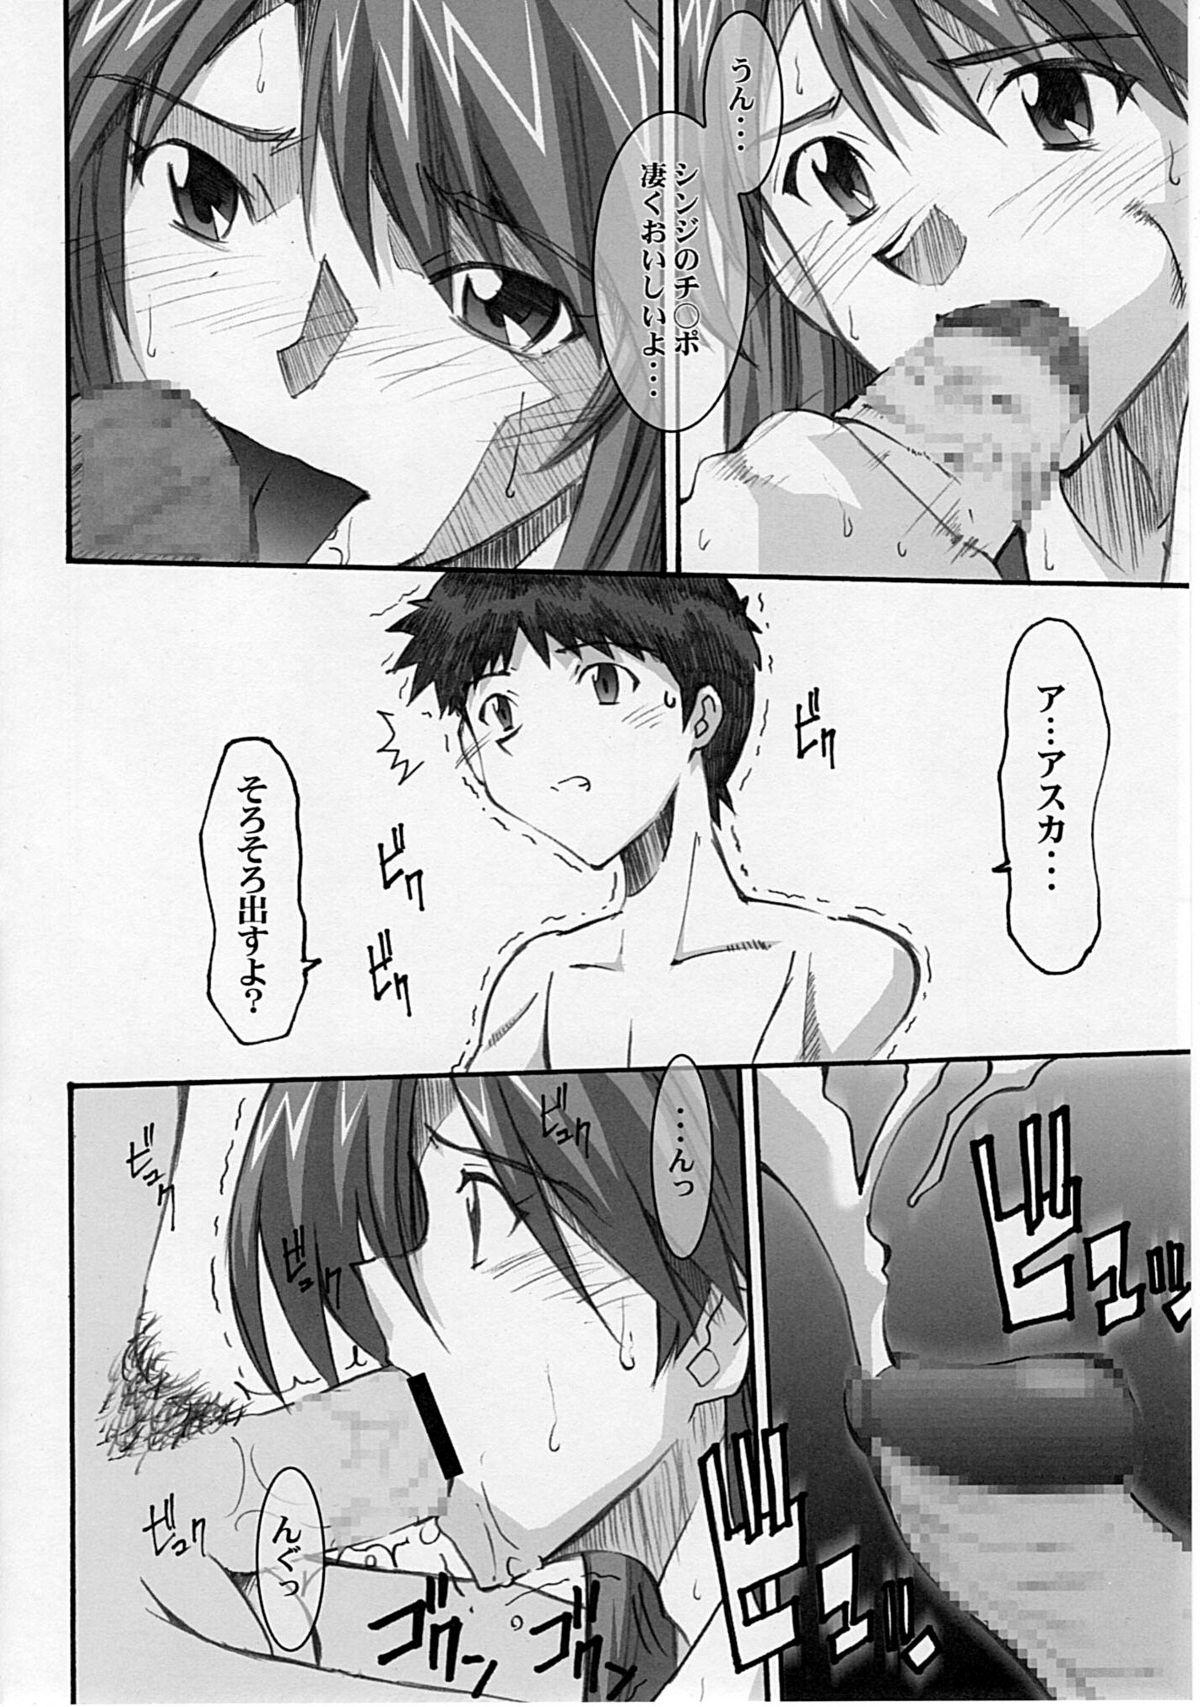 Sex Pussy Asuka's Diary 01 - Neon genesis evangelion Amateur Pussy - Page 7